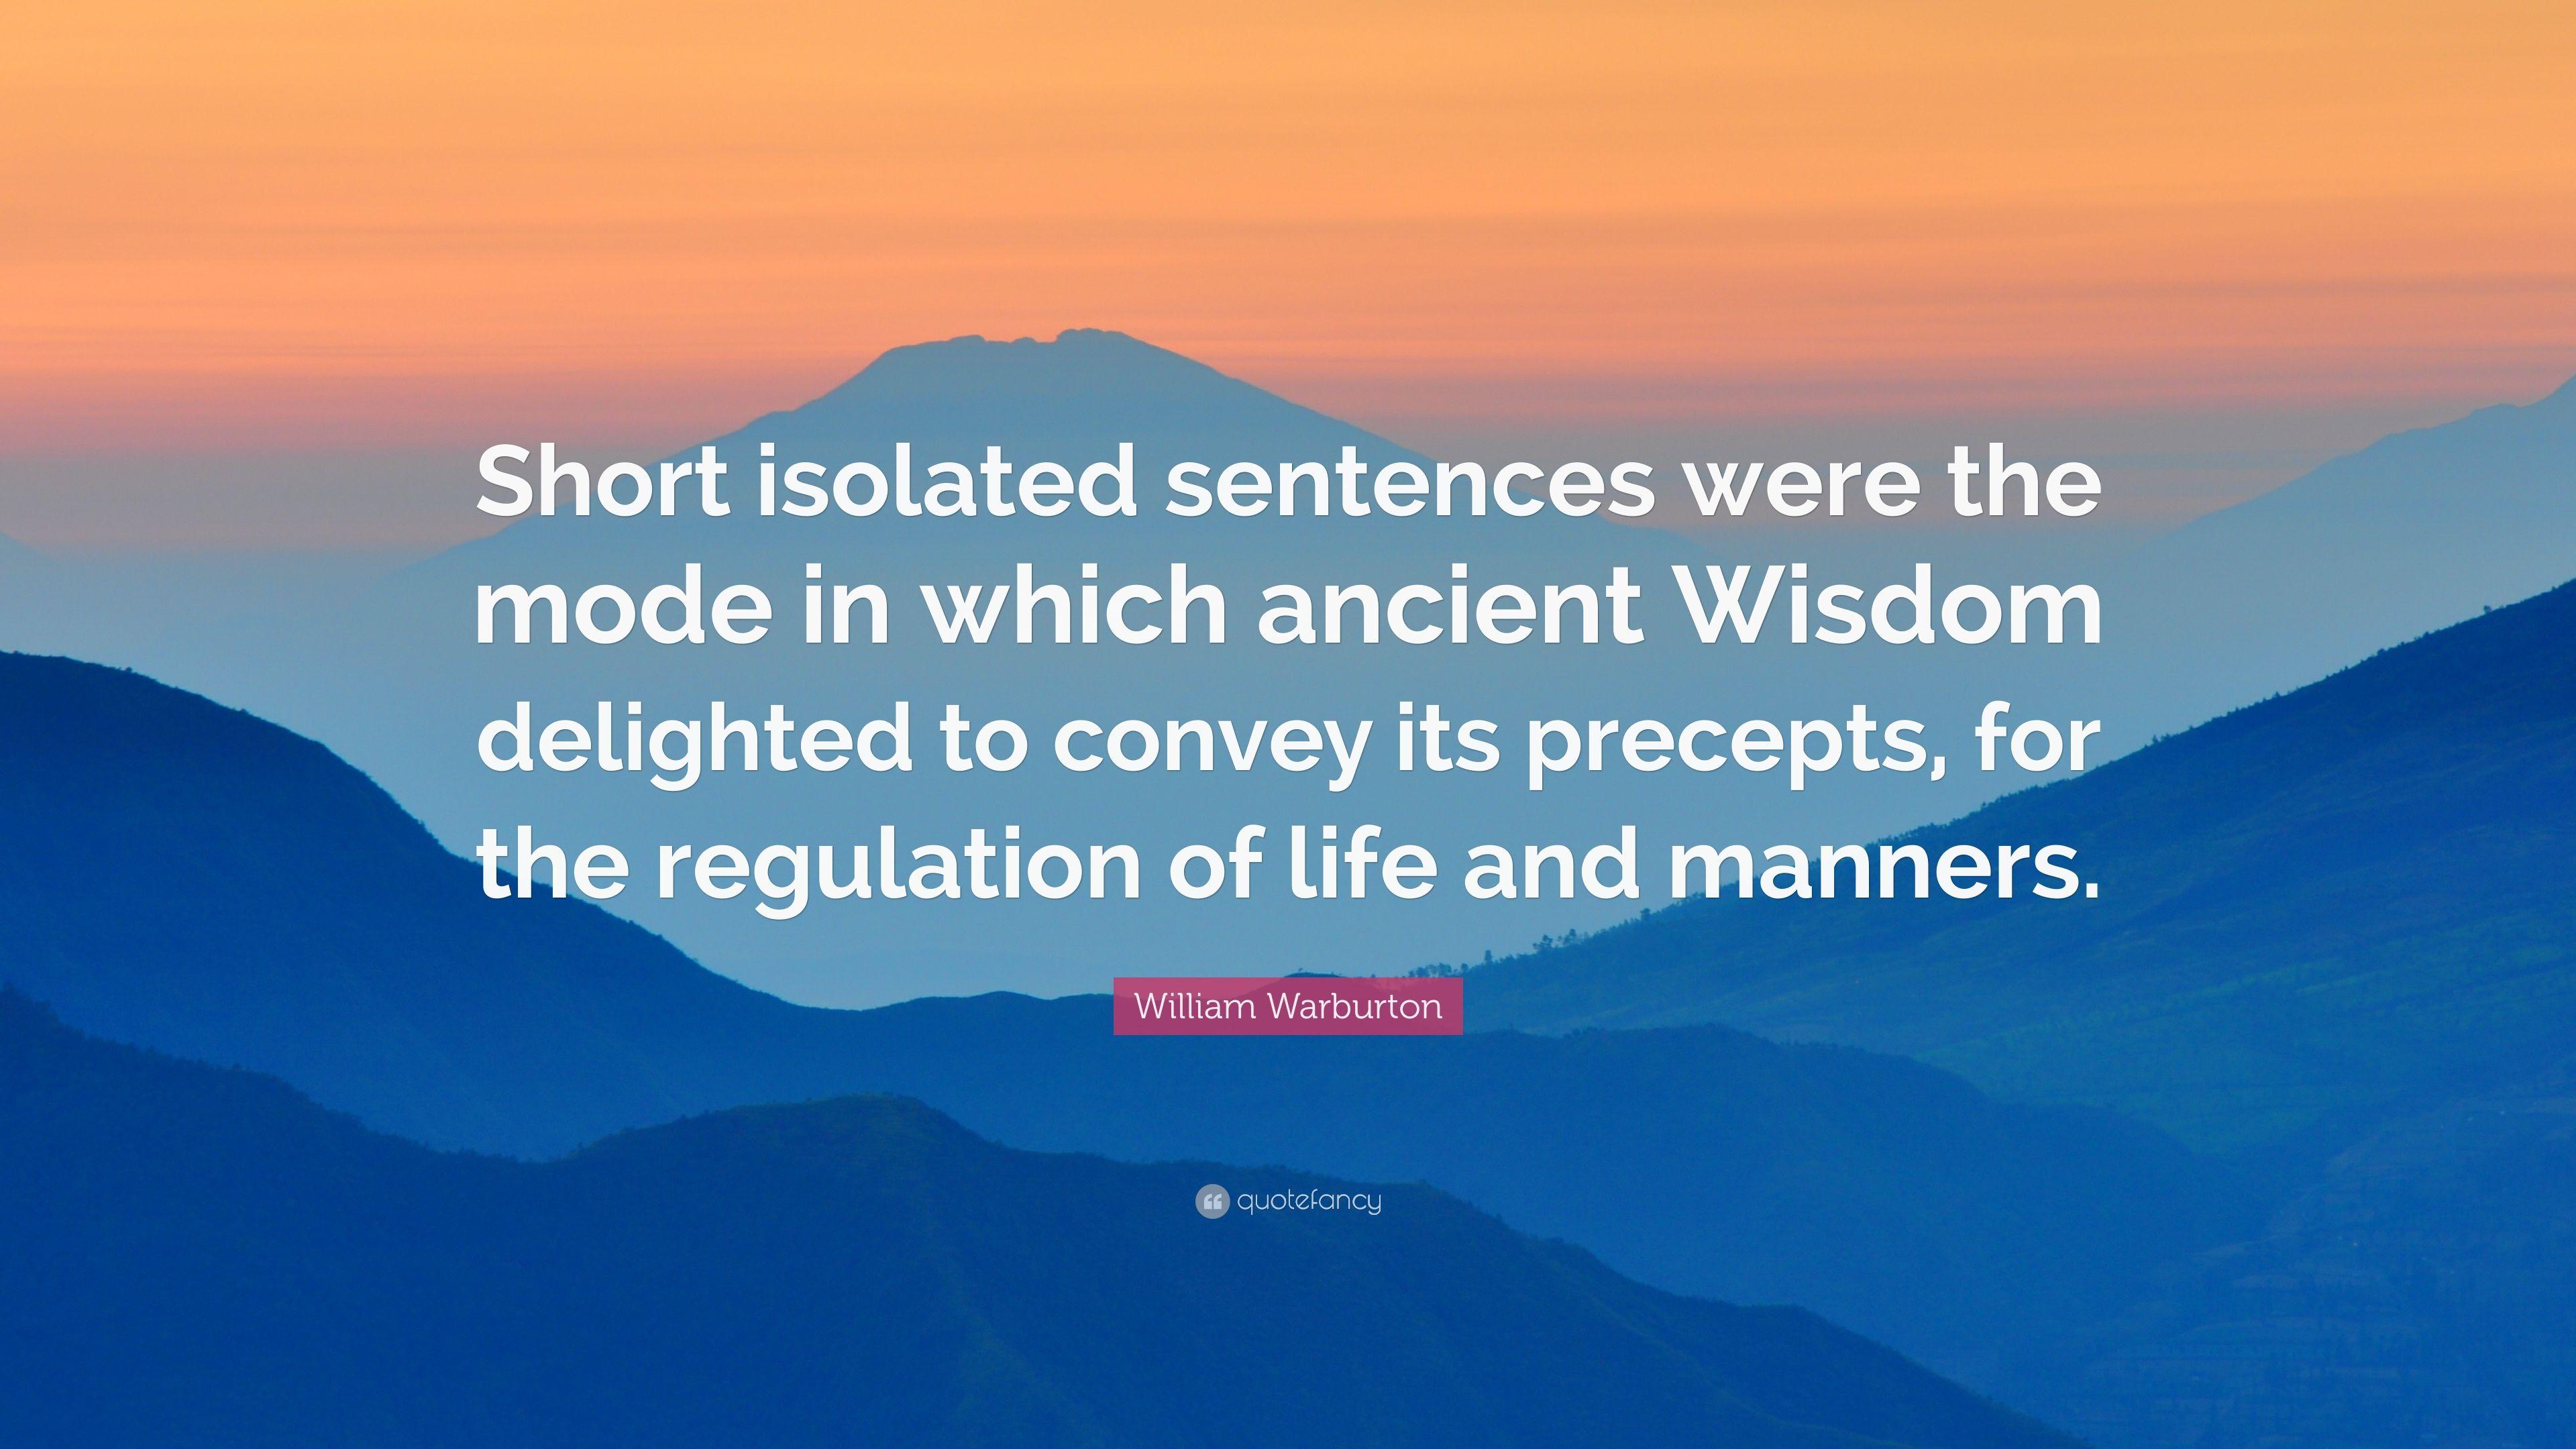 William Warburton Quote: “Short isolated sentences were the mode